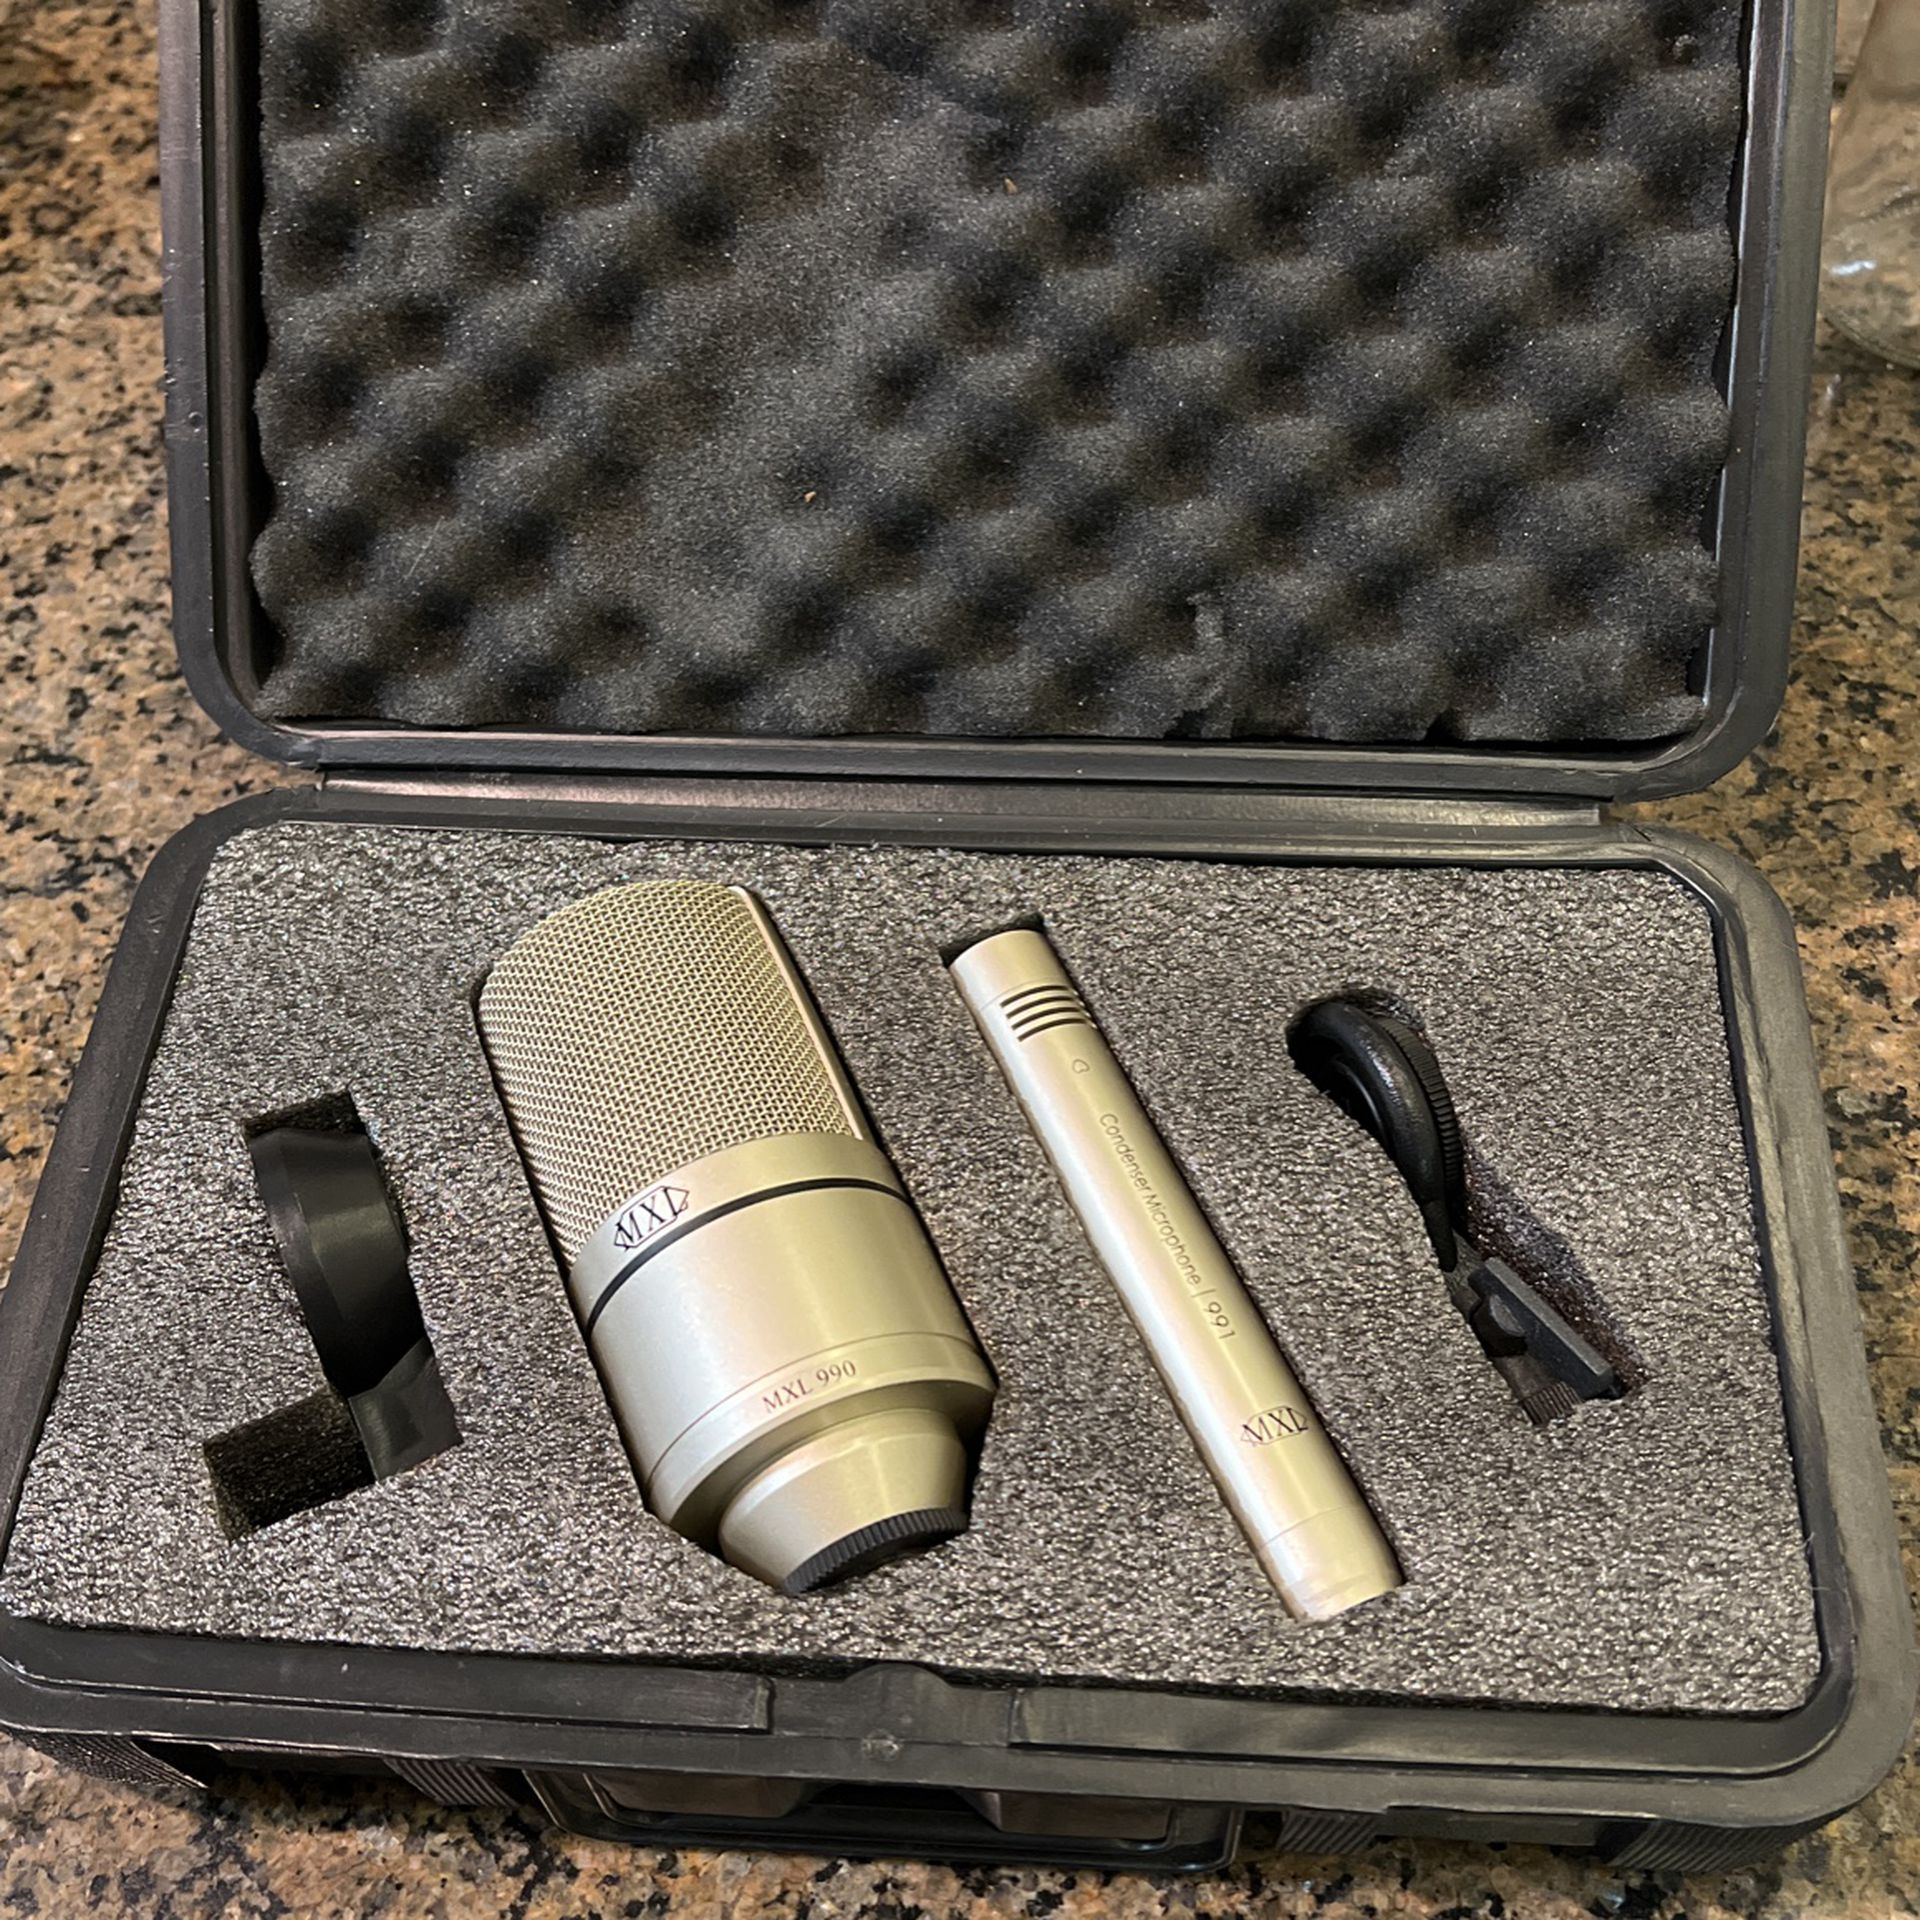 MXL 990/991 Recording Microphone Package